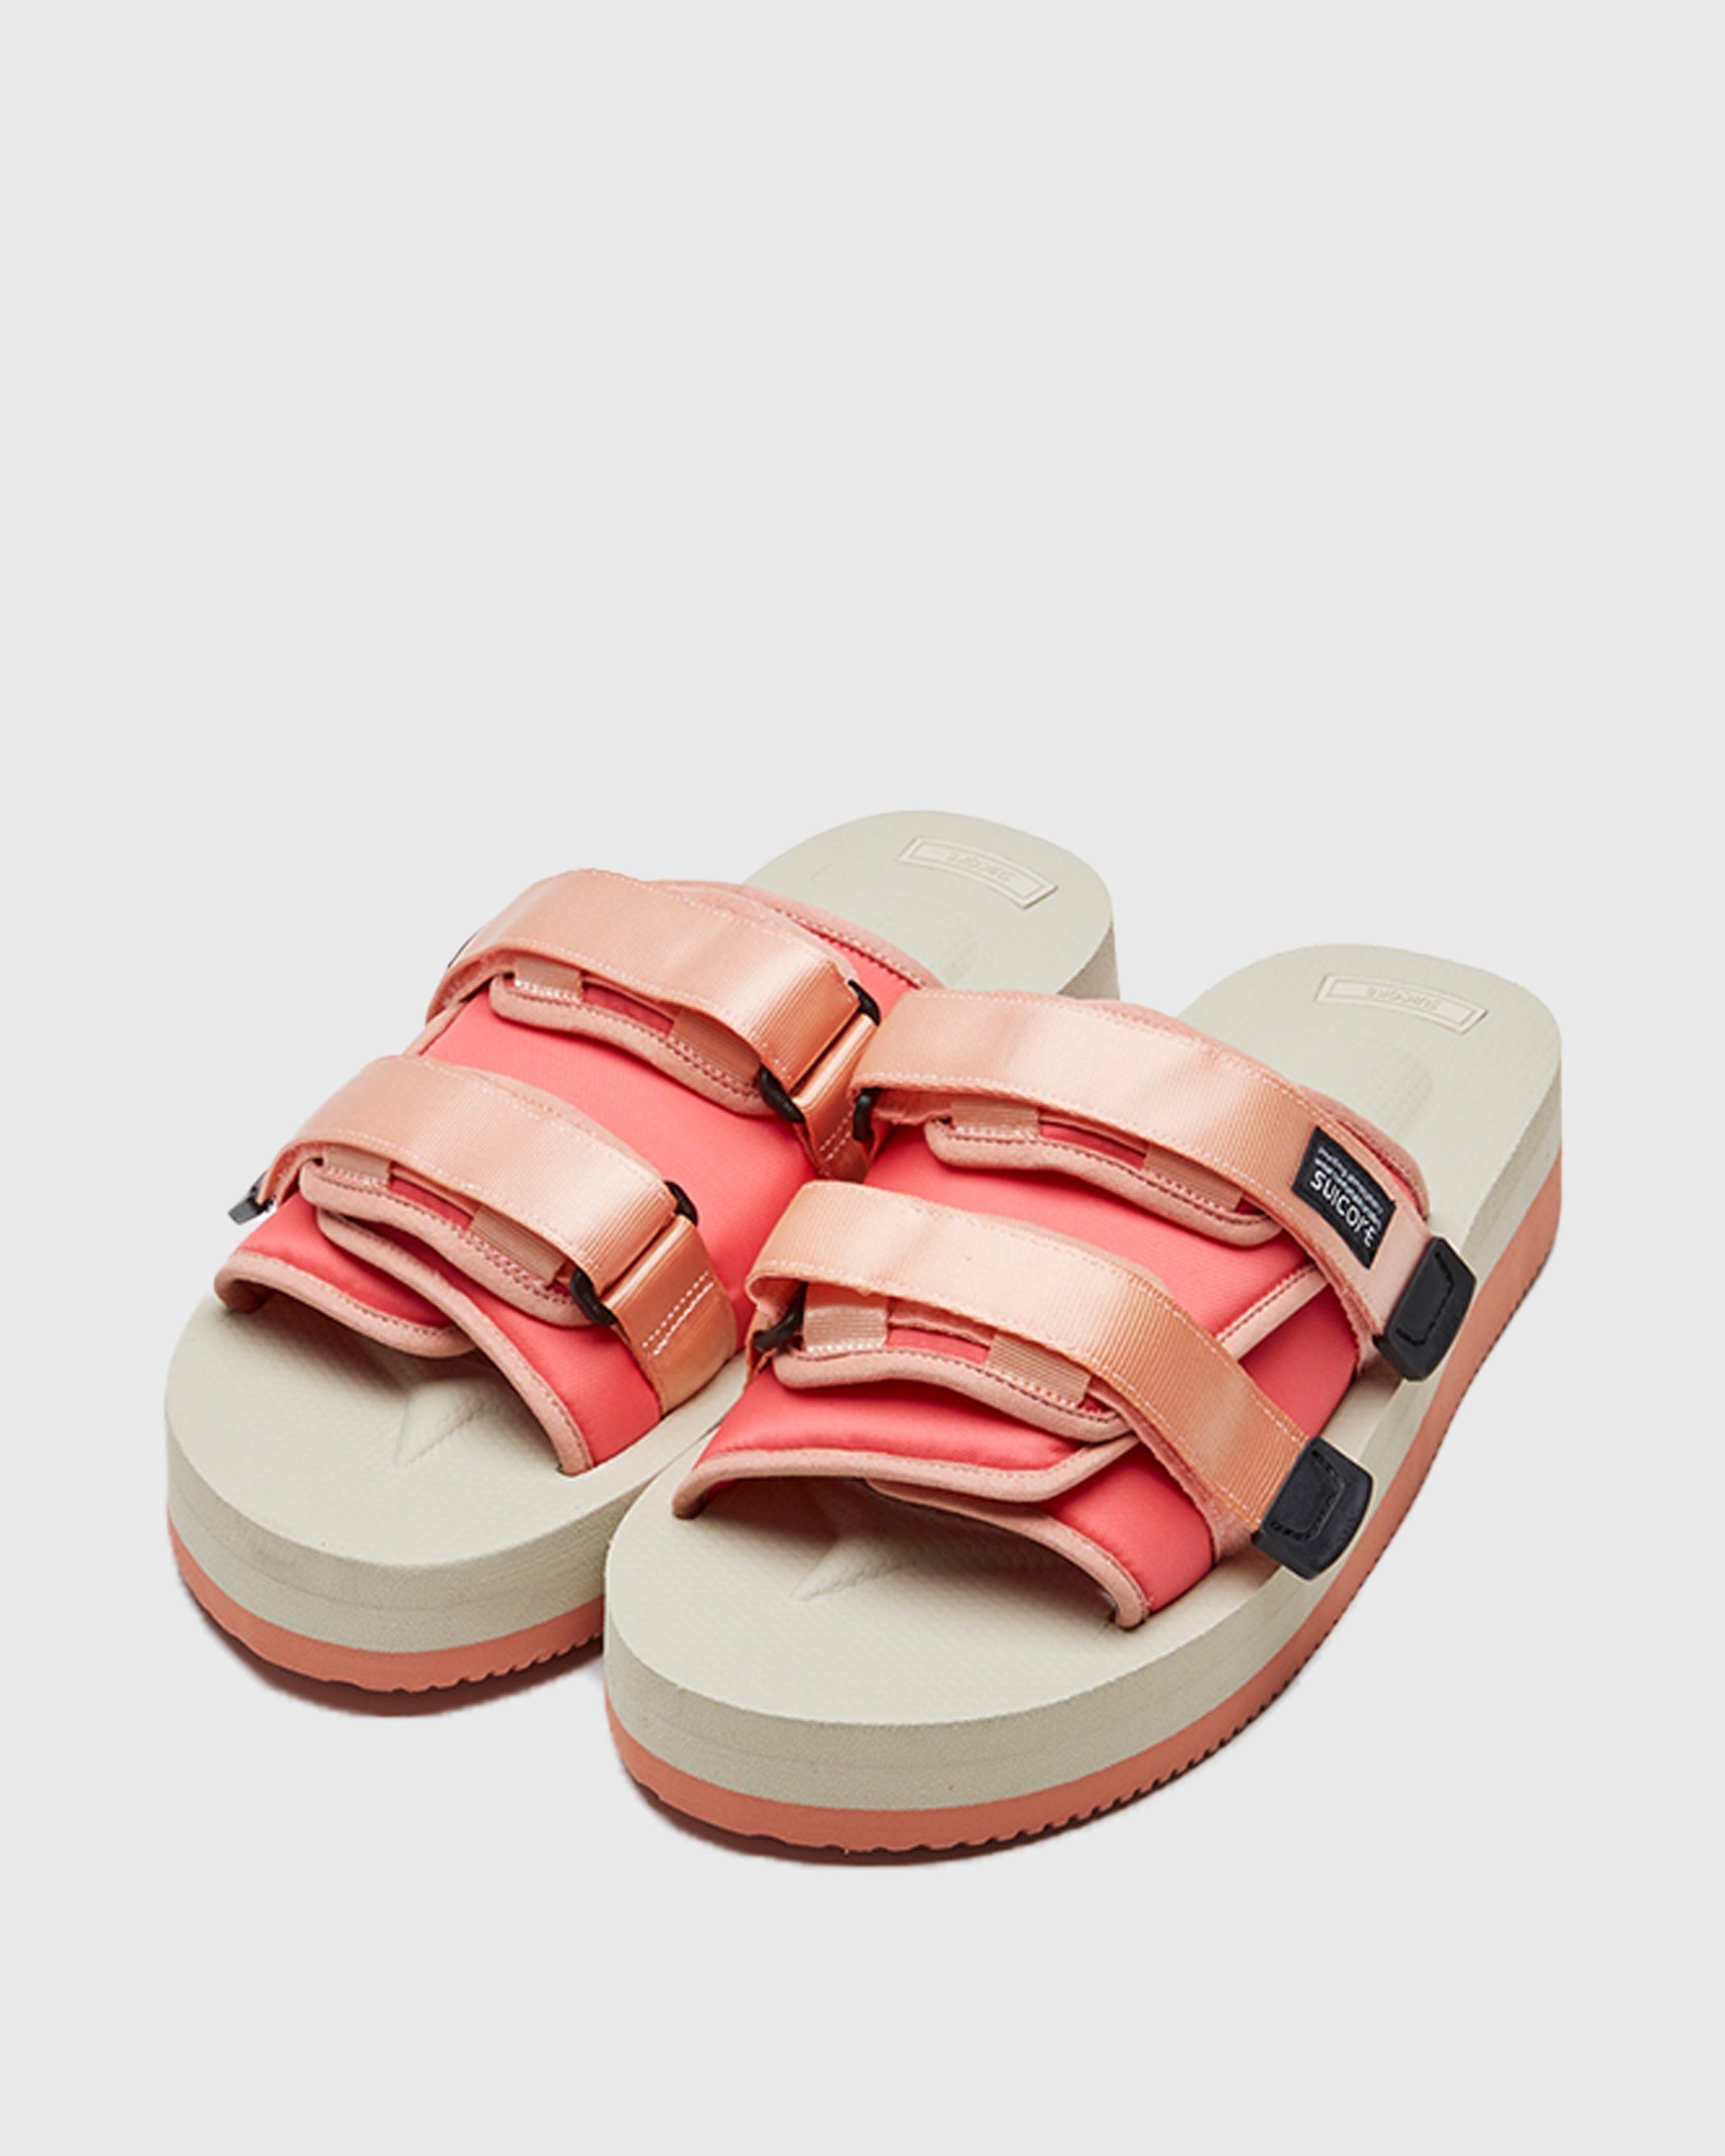 SUICOKE MOTO-VPO in Pink OG-056VPO | Shop from eightywingold an official brand partner for SUICOKE Canada and US.